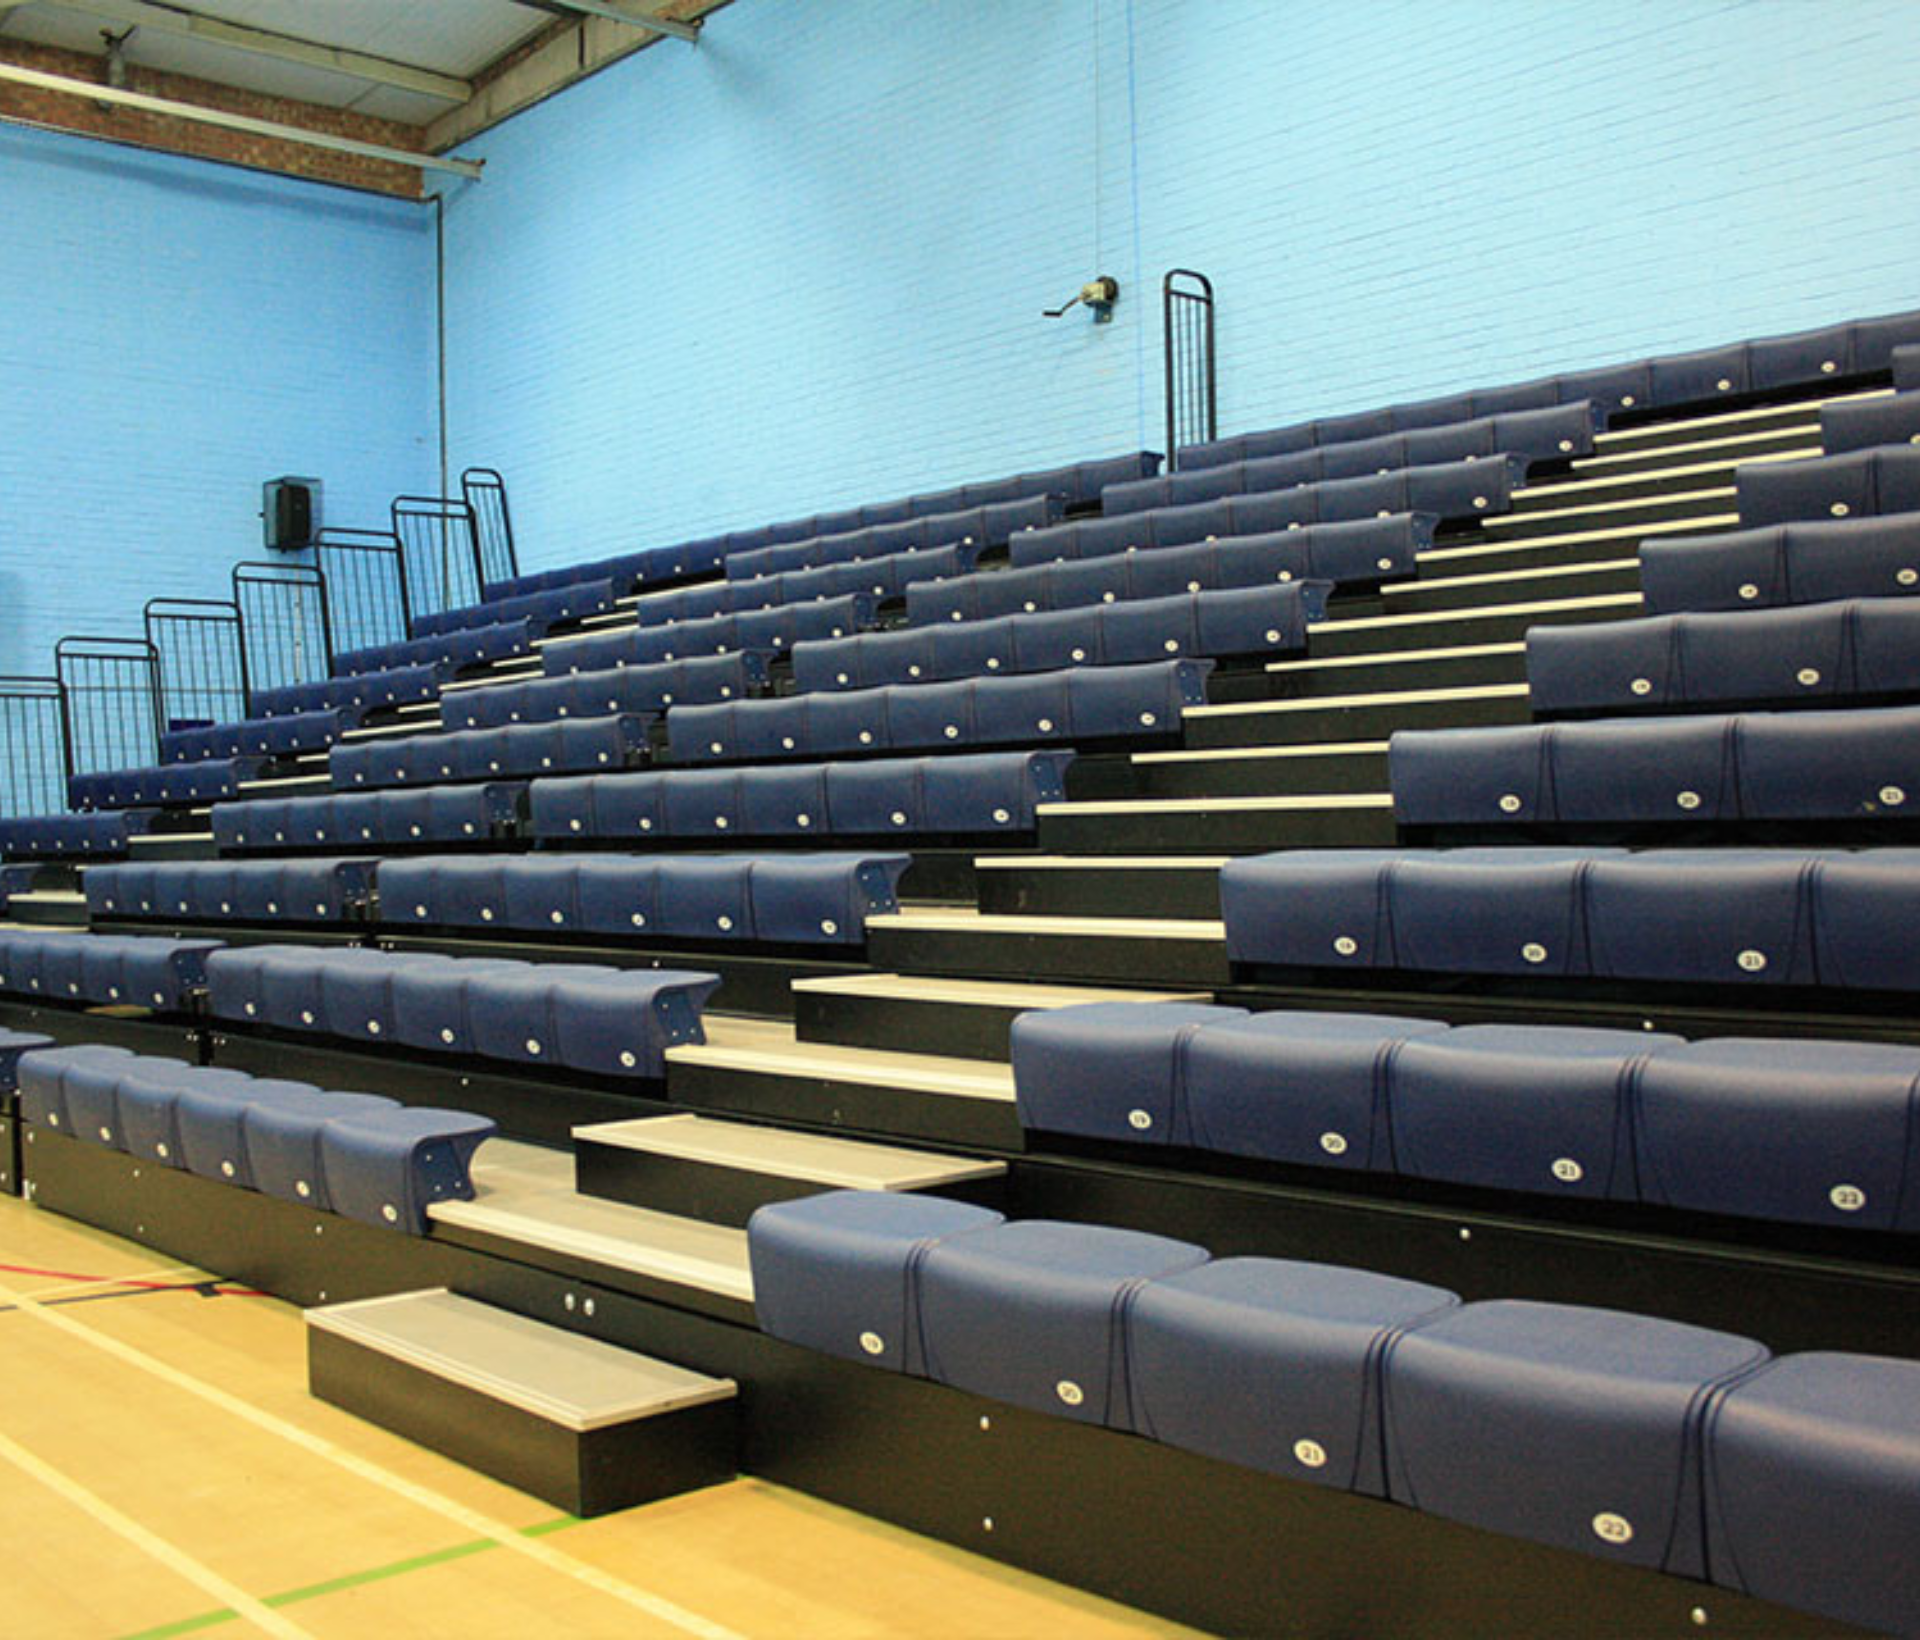 A row of blue seats in a stadium.